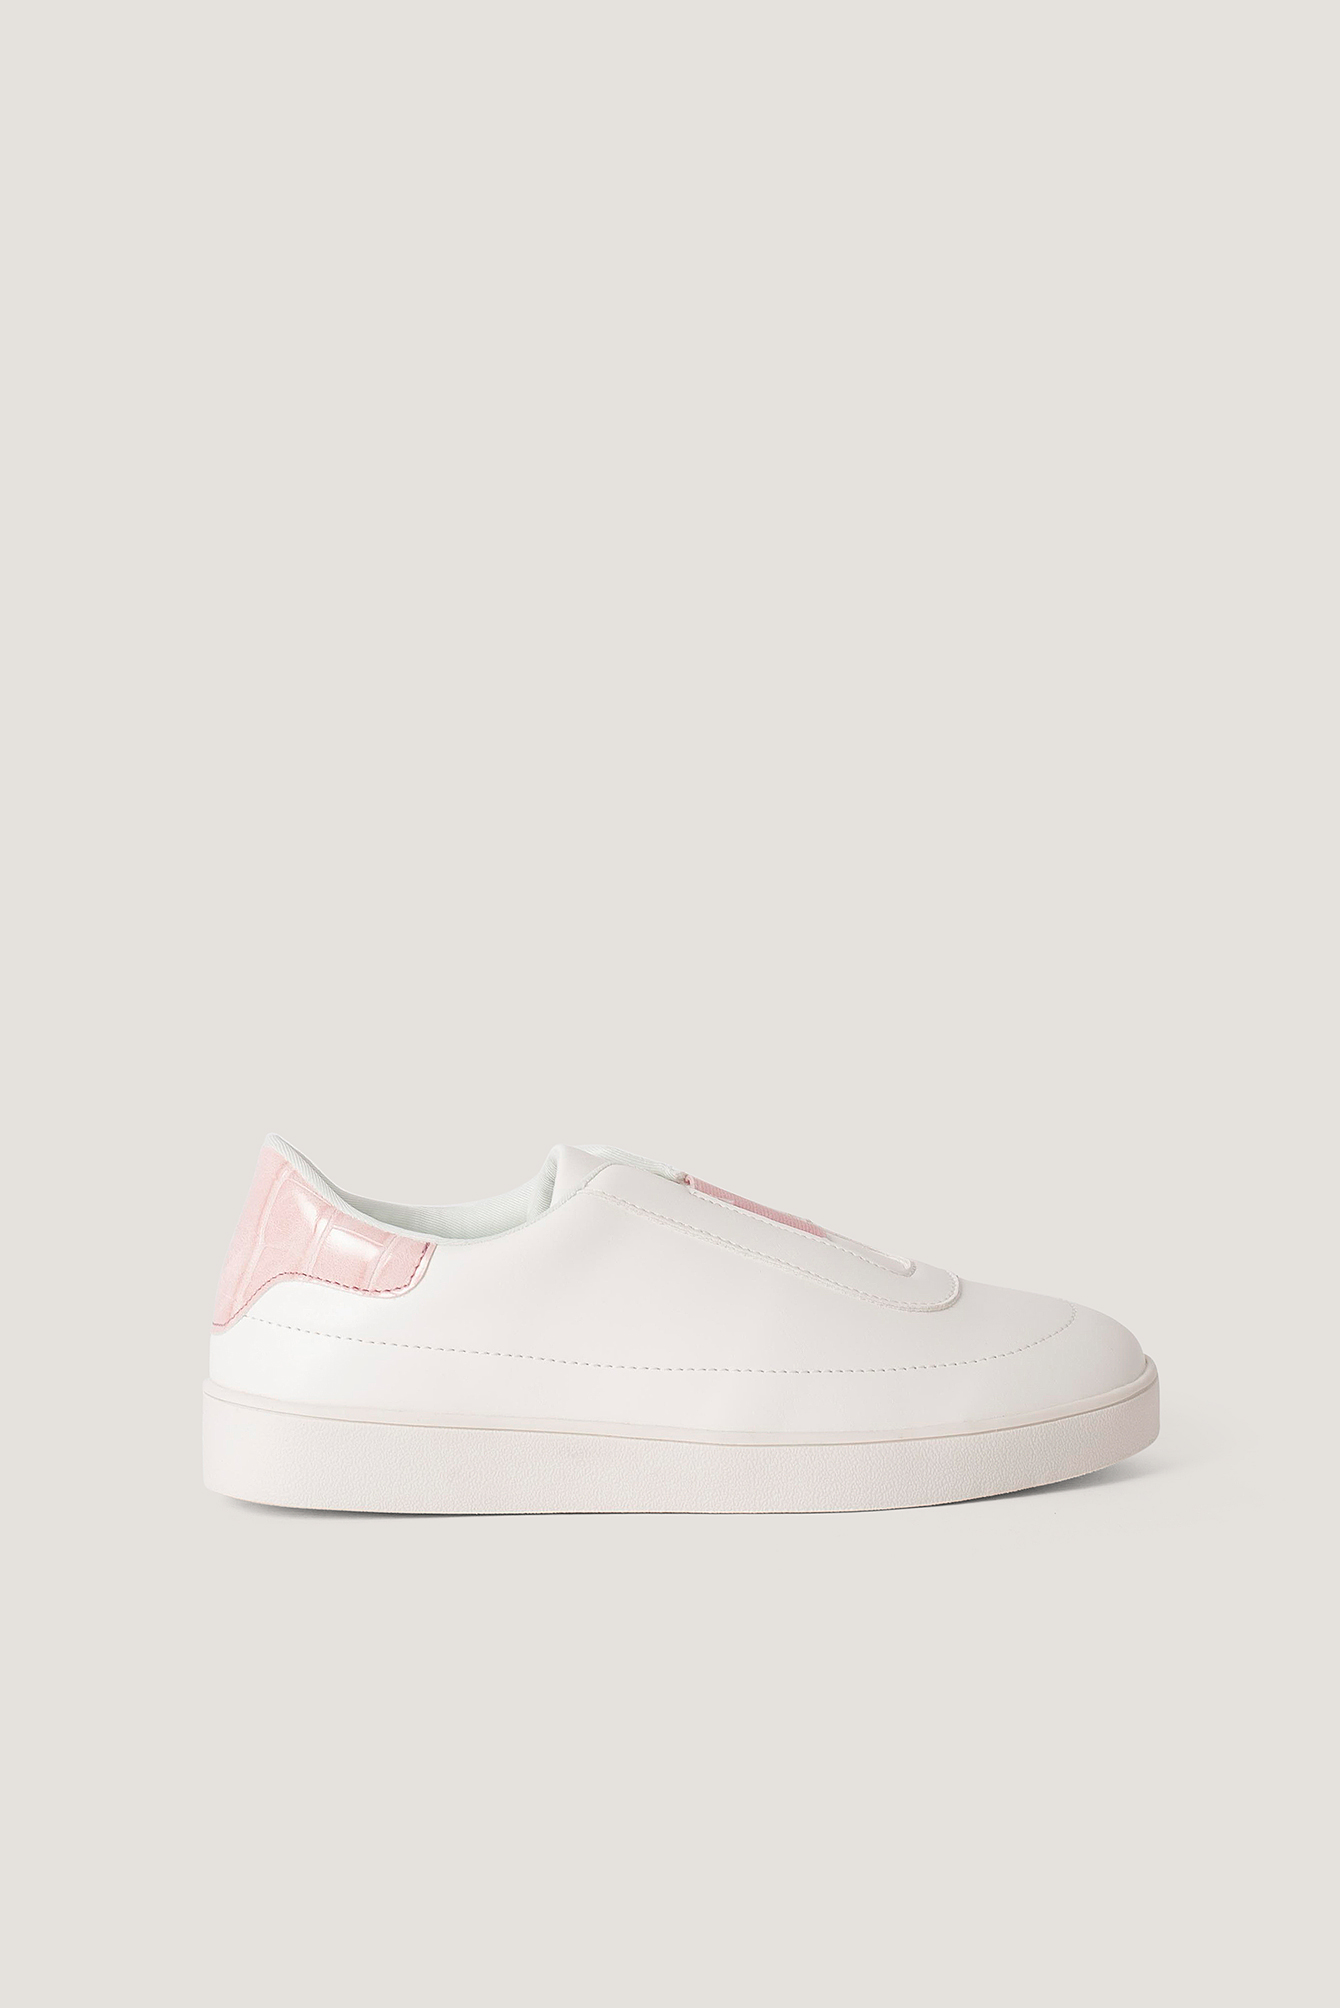 Offwhite/Pink Slip In Trainers